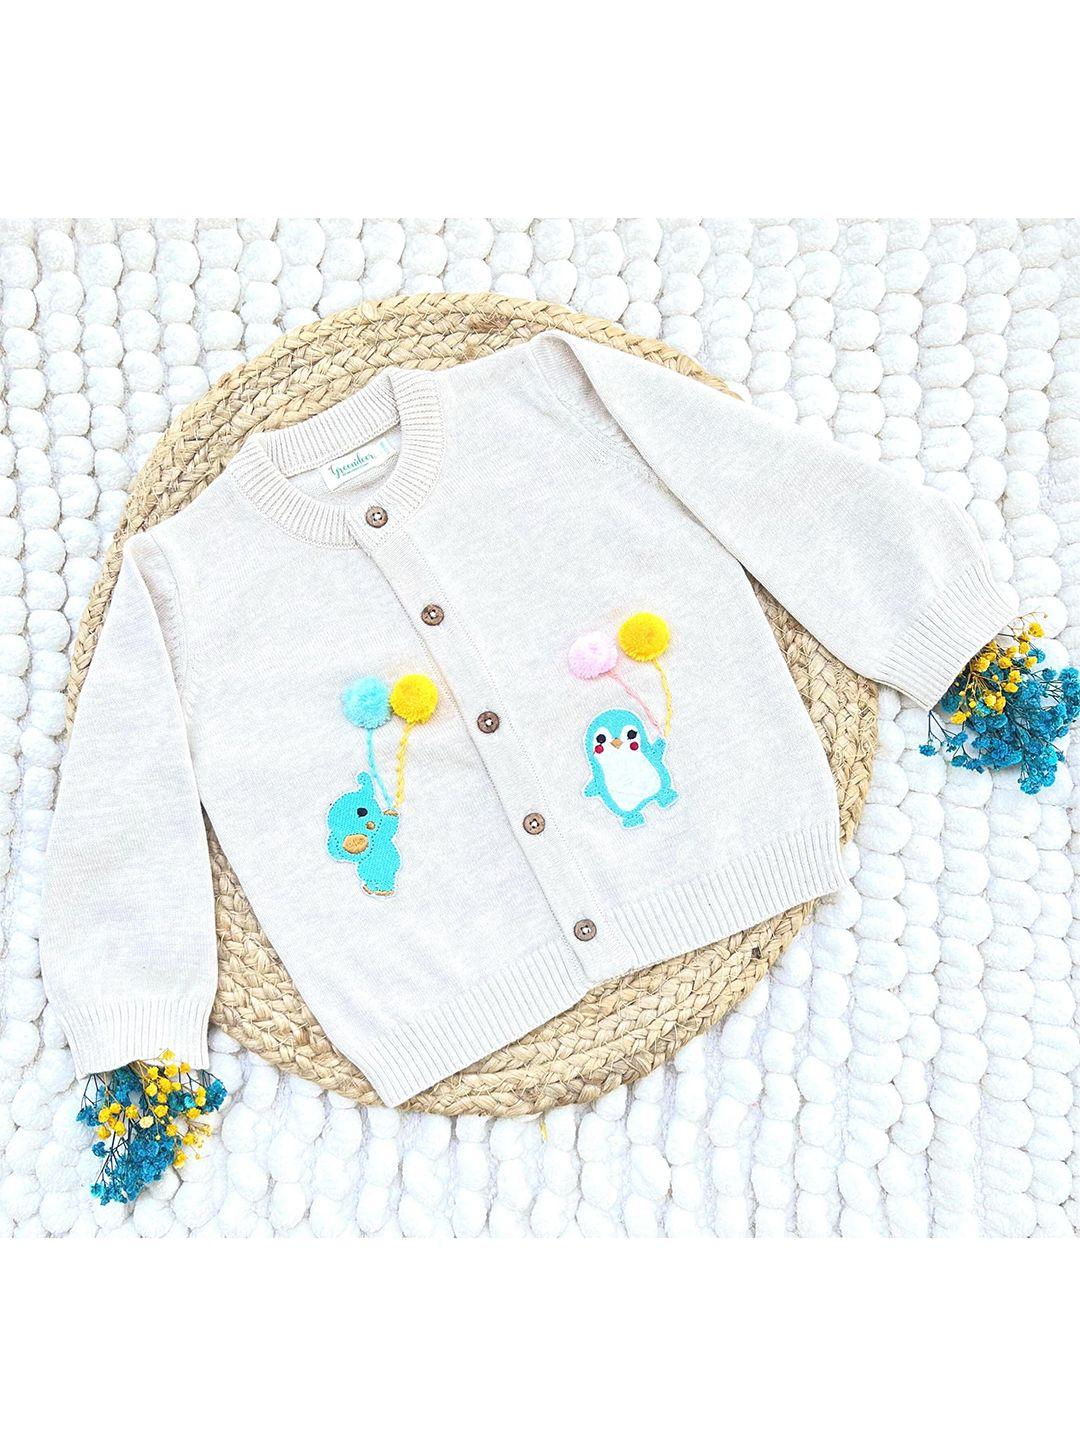 greendeer unisex kids white & blue cable knit cardigan